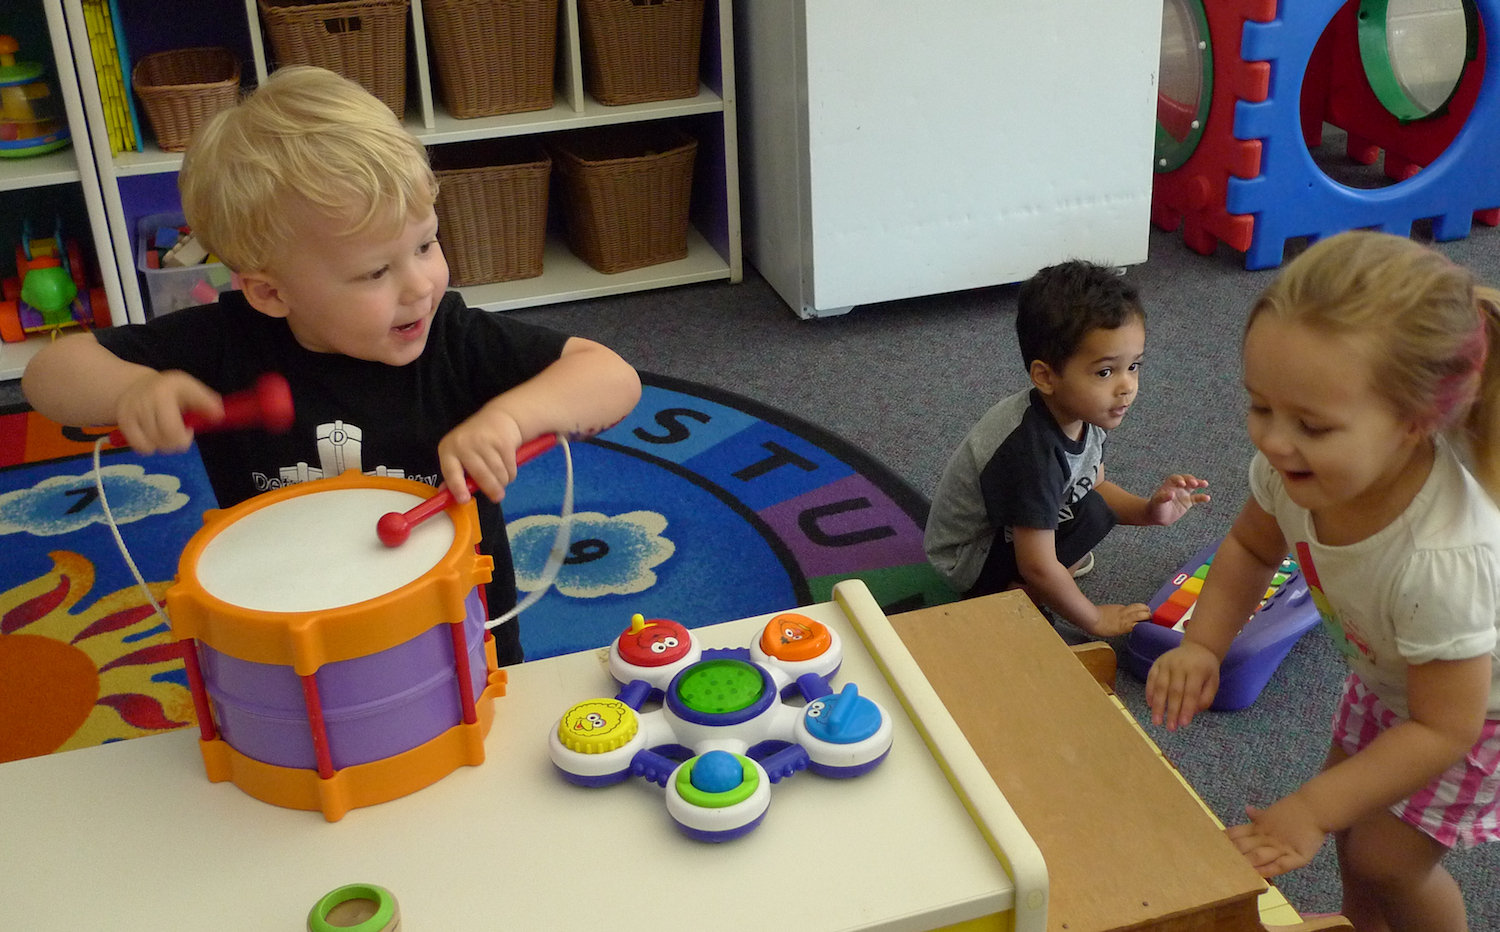 Daycare Centers At Workplace – The Latest Concept